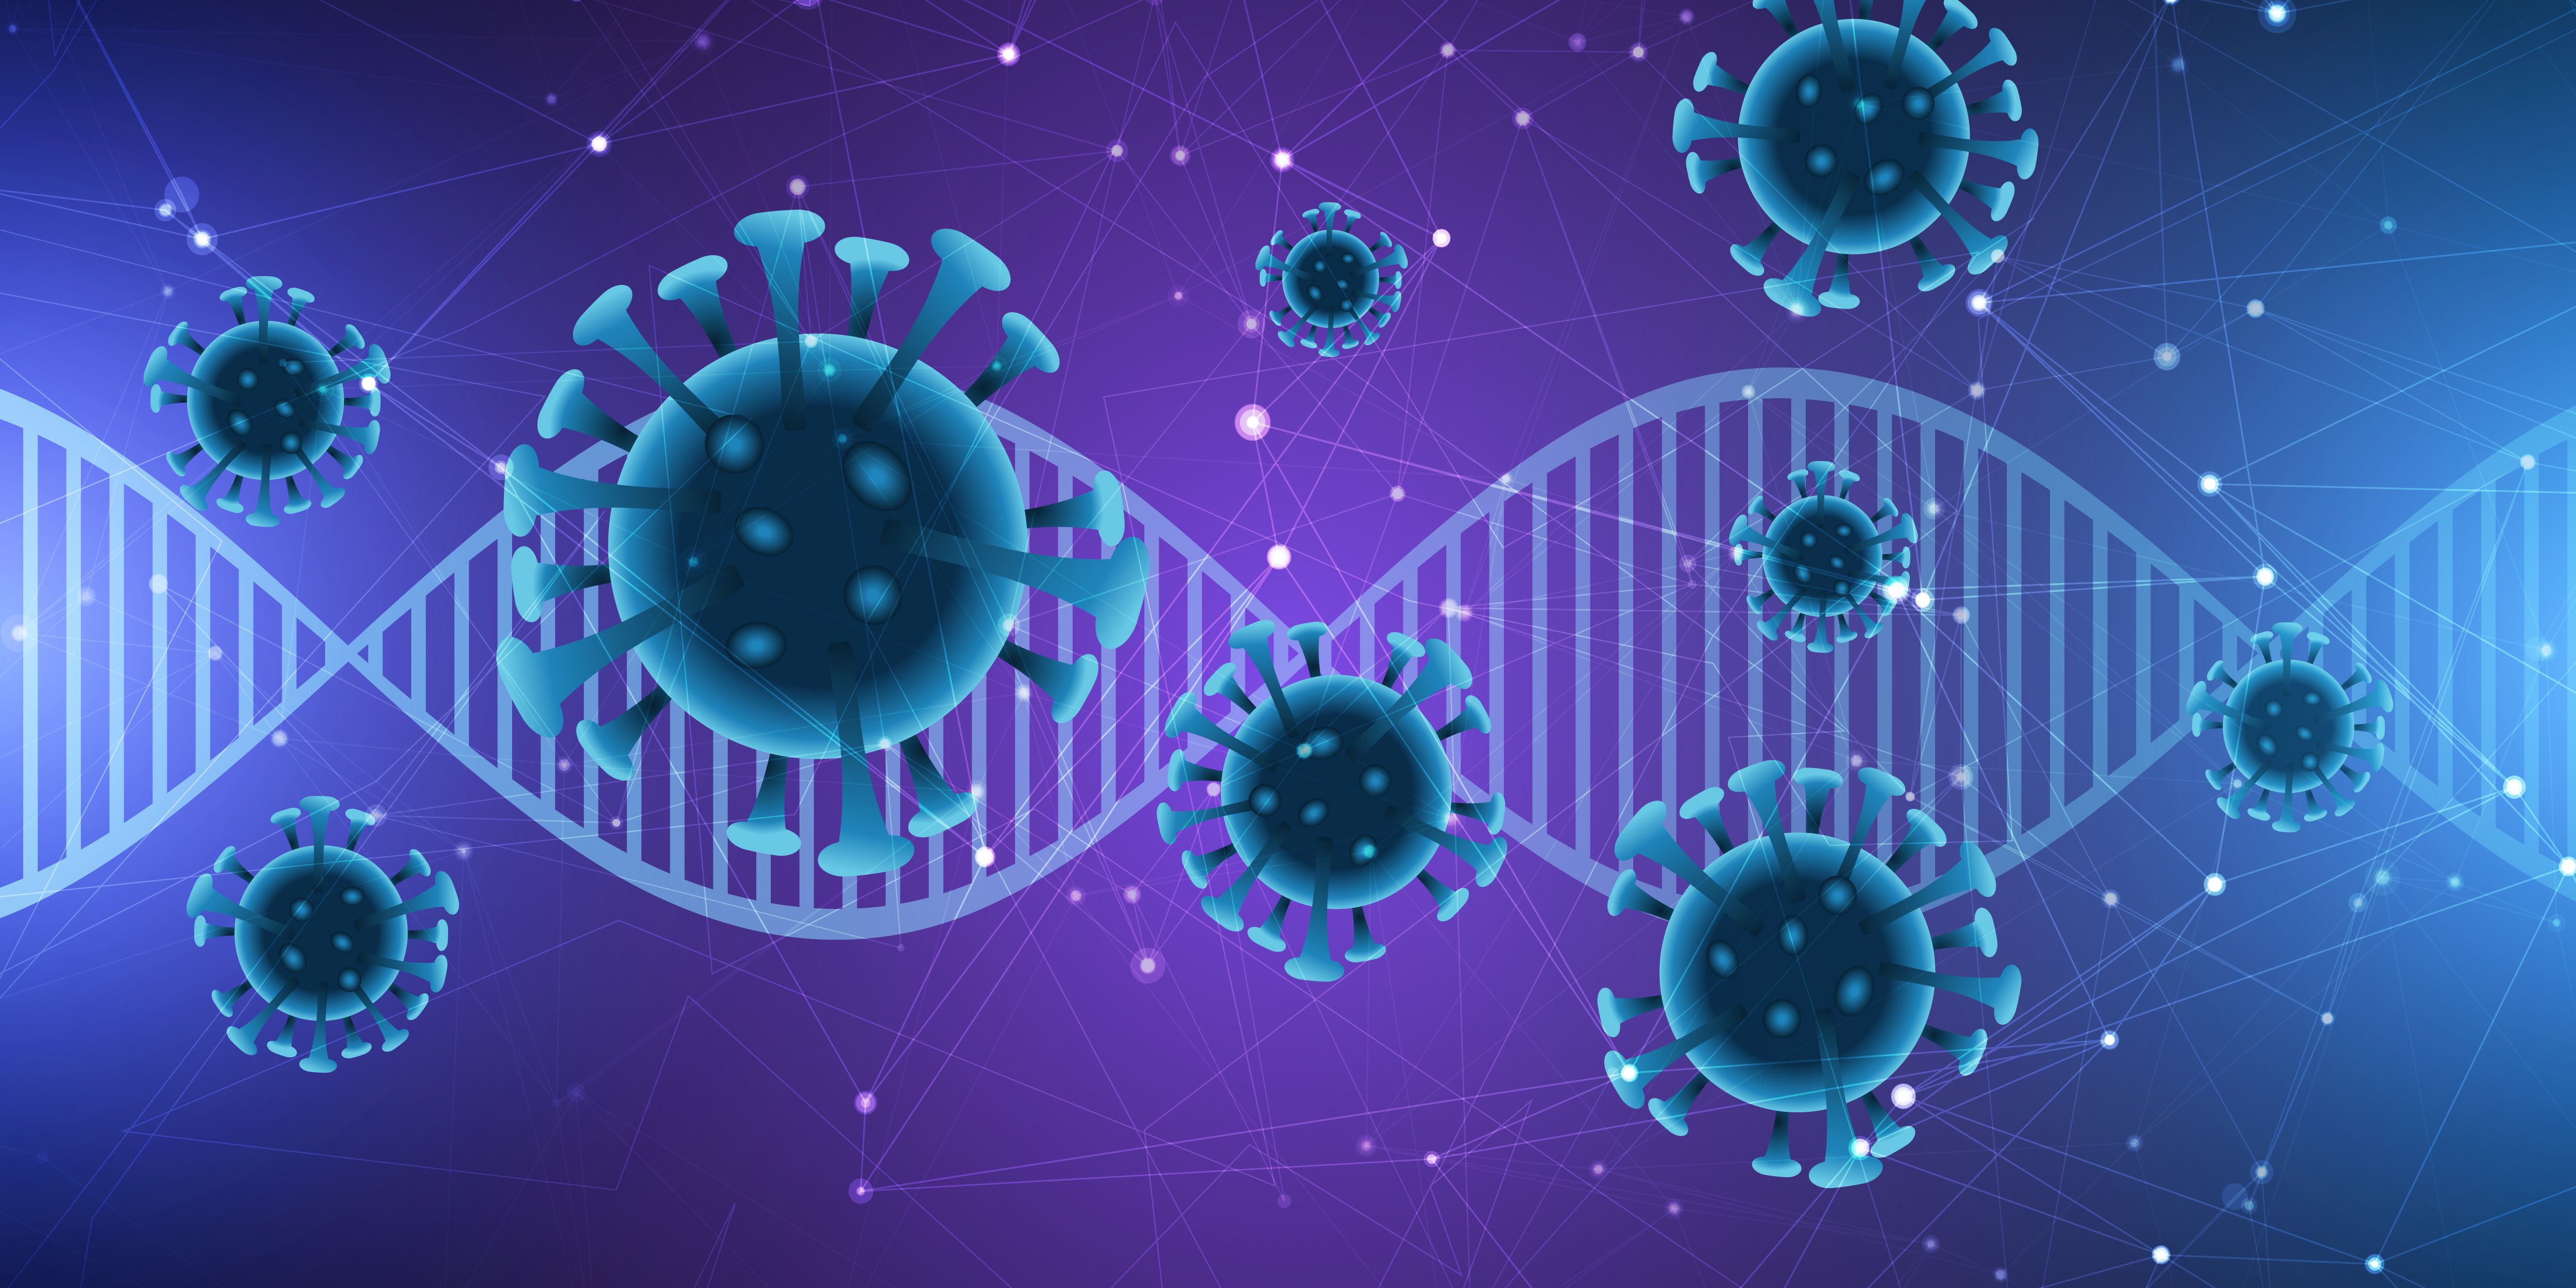 Dna strand and virus cells Free Vector